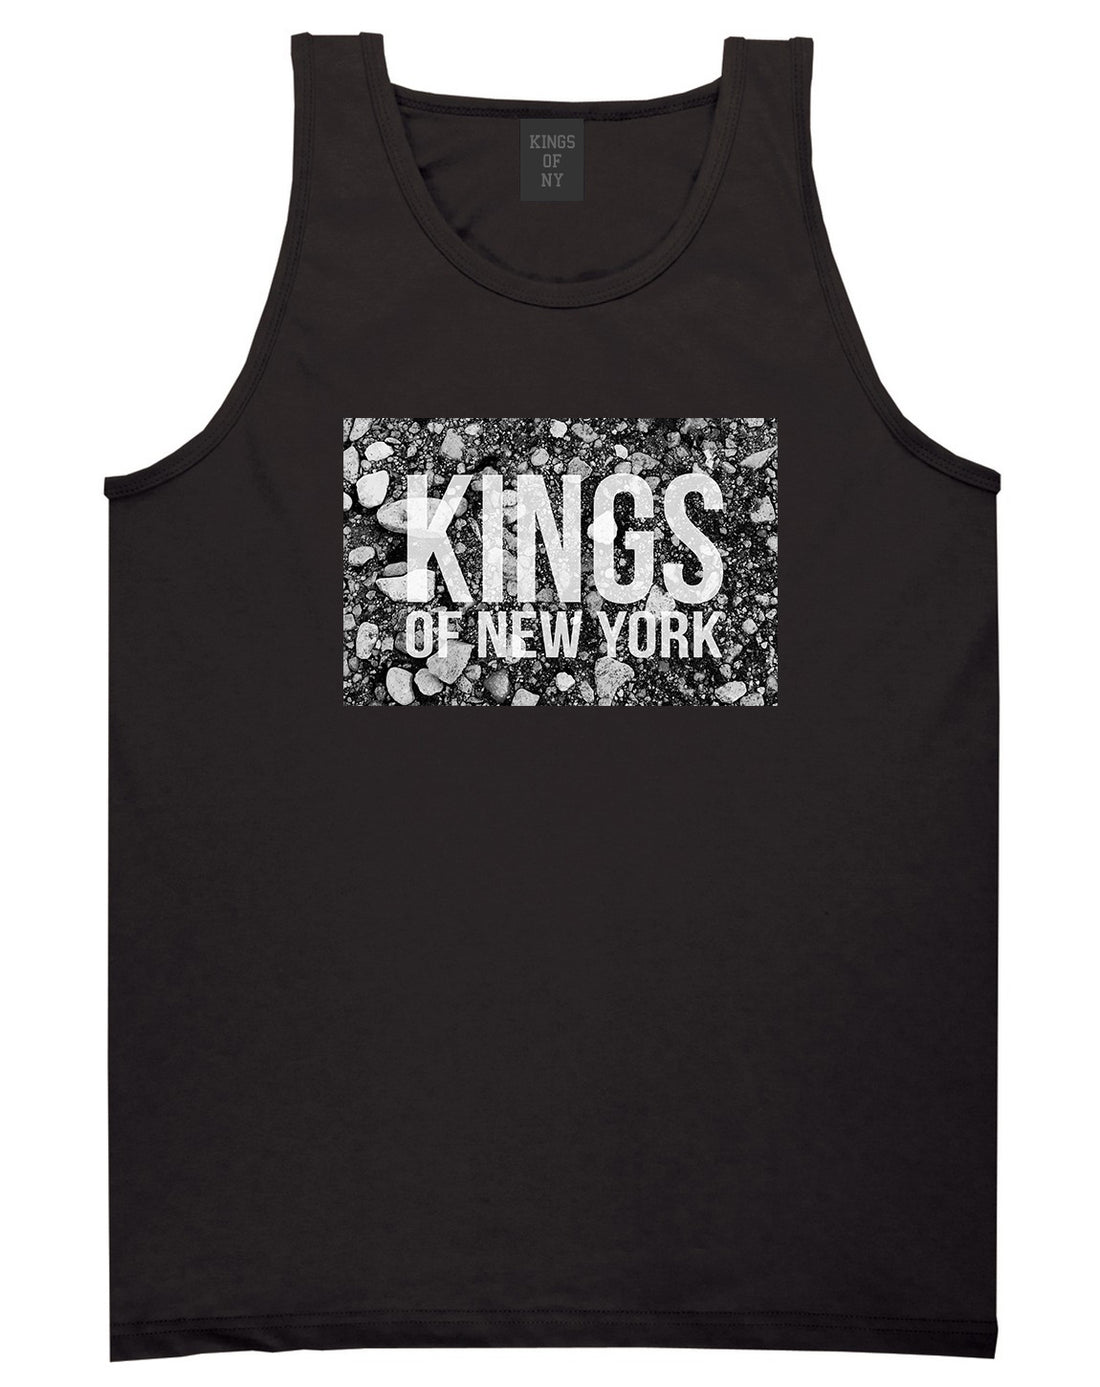 Came From The Dirt KONY Mens Tank Top Shirt Black